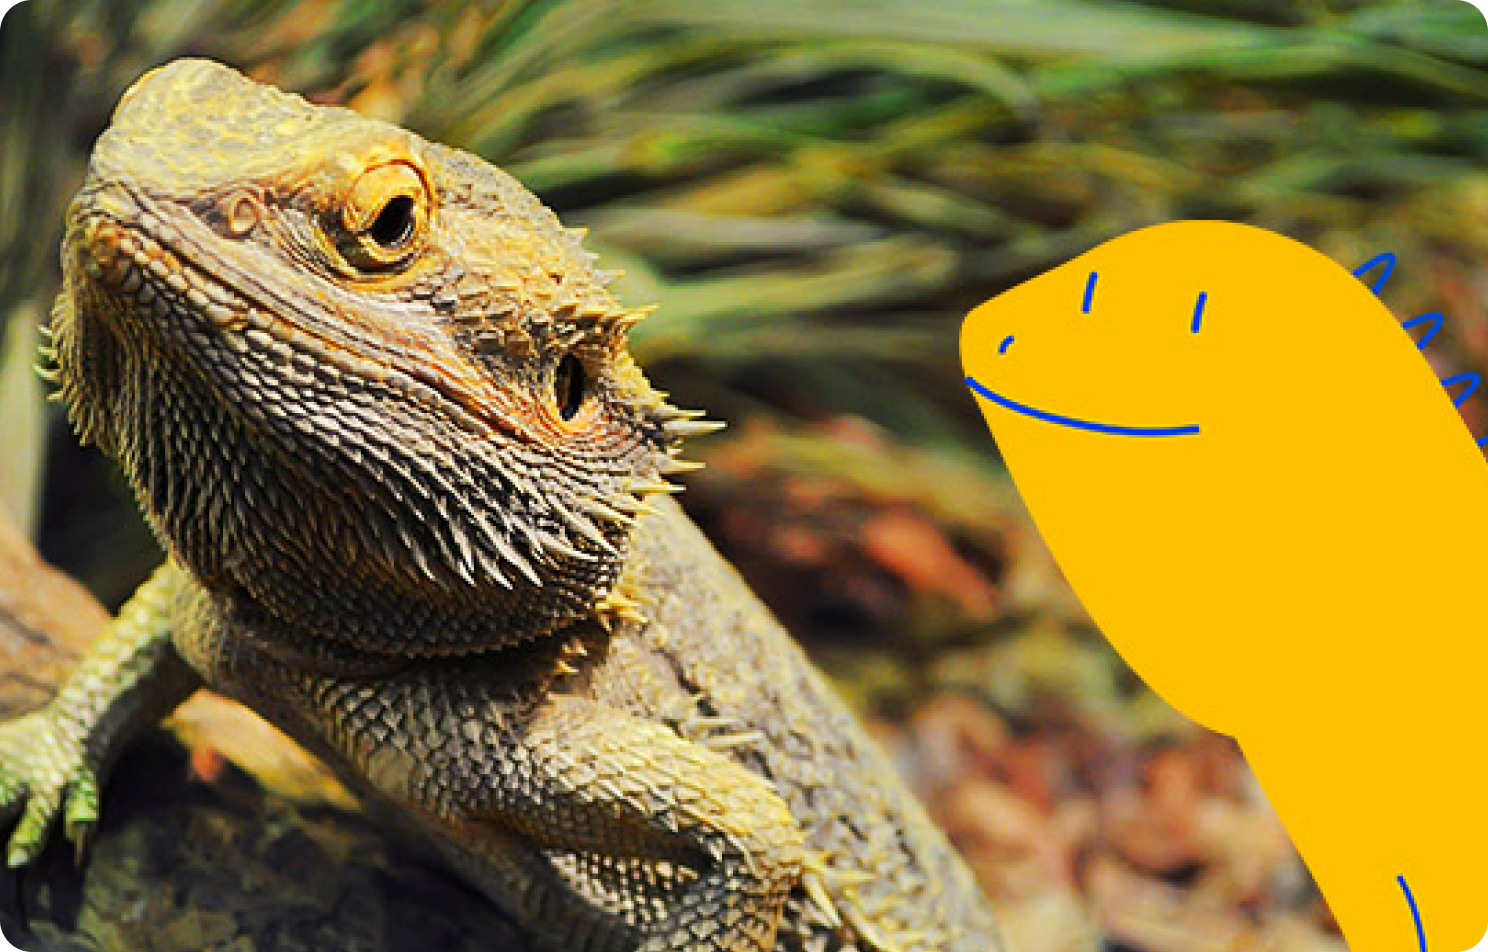 Pet Owner Guide to Caring for a Bearded Dragon